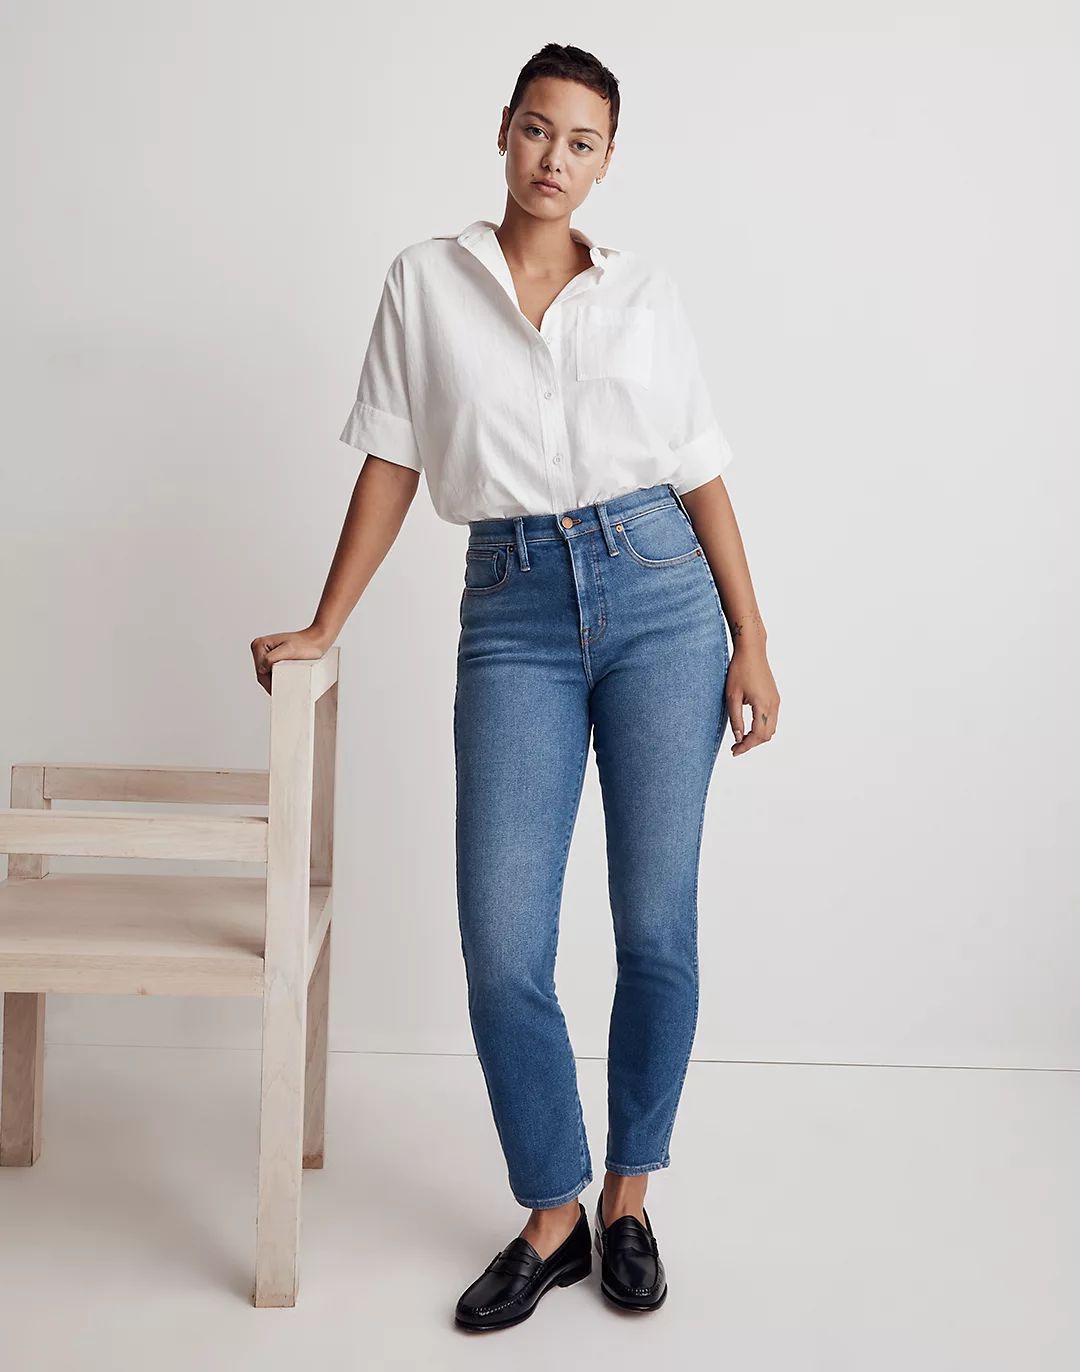 Curvy Stovepipe Jeans in Leaside Wash | Madewell